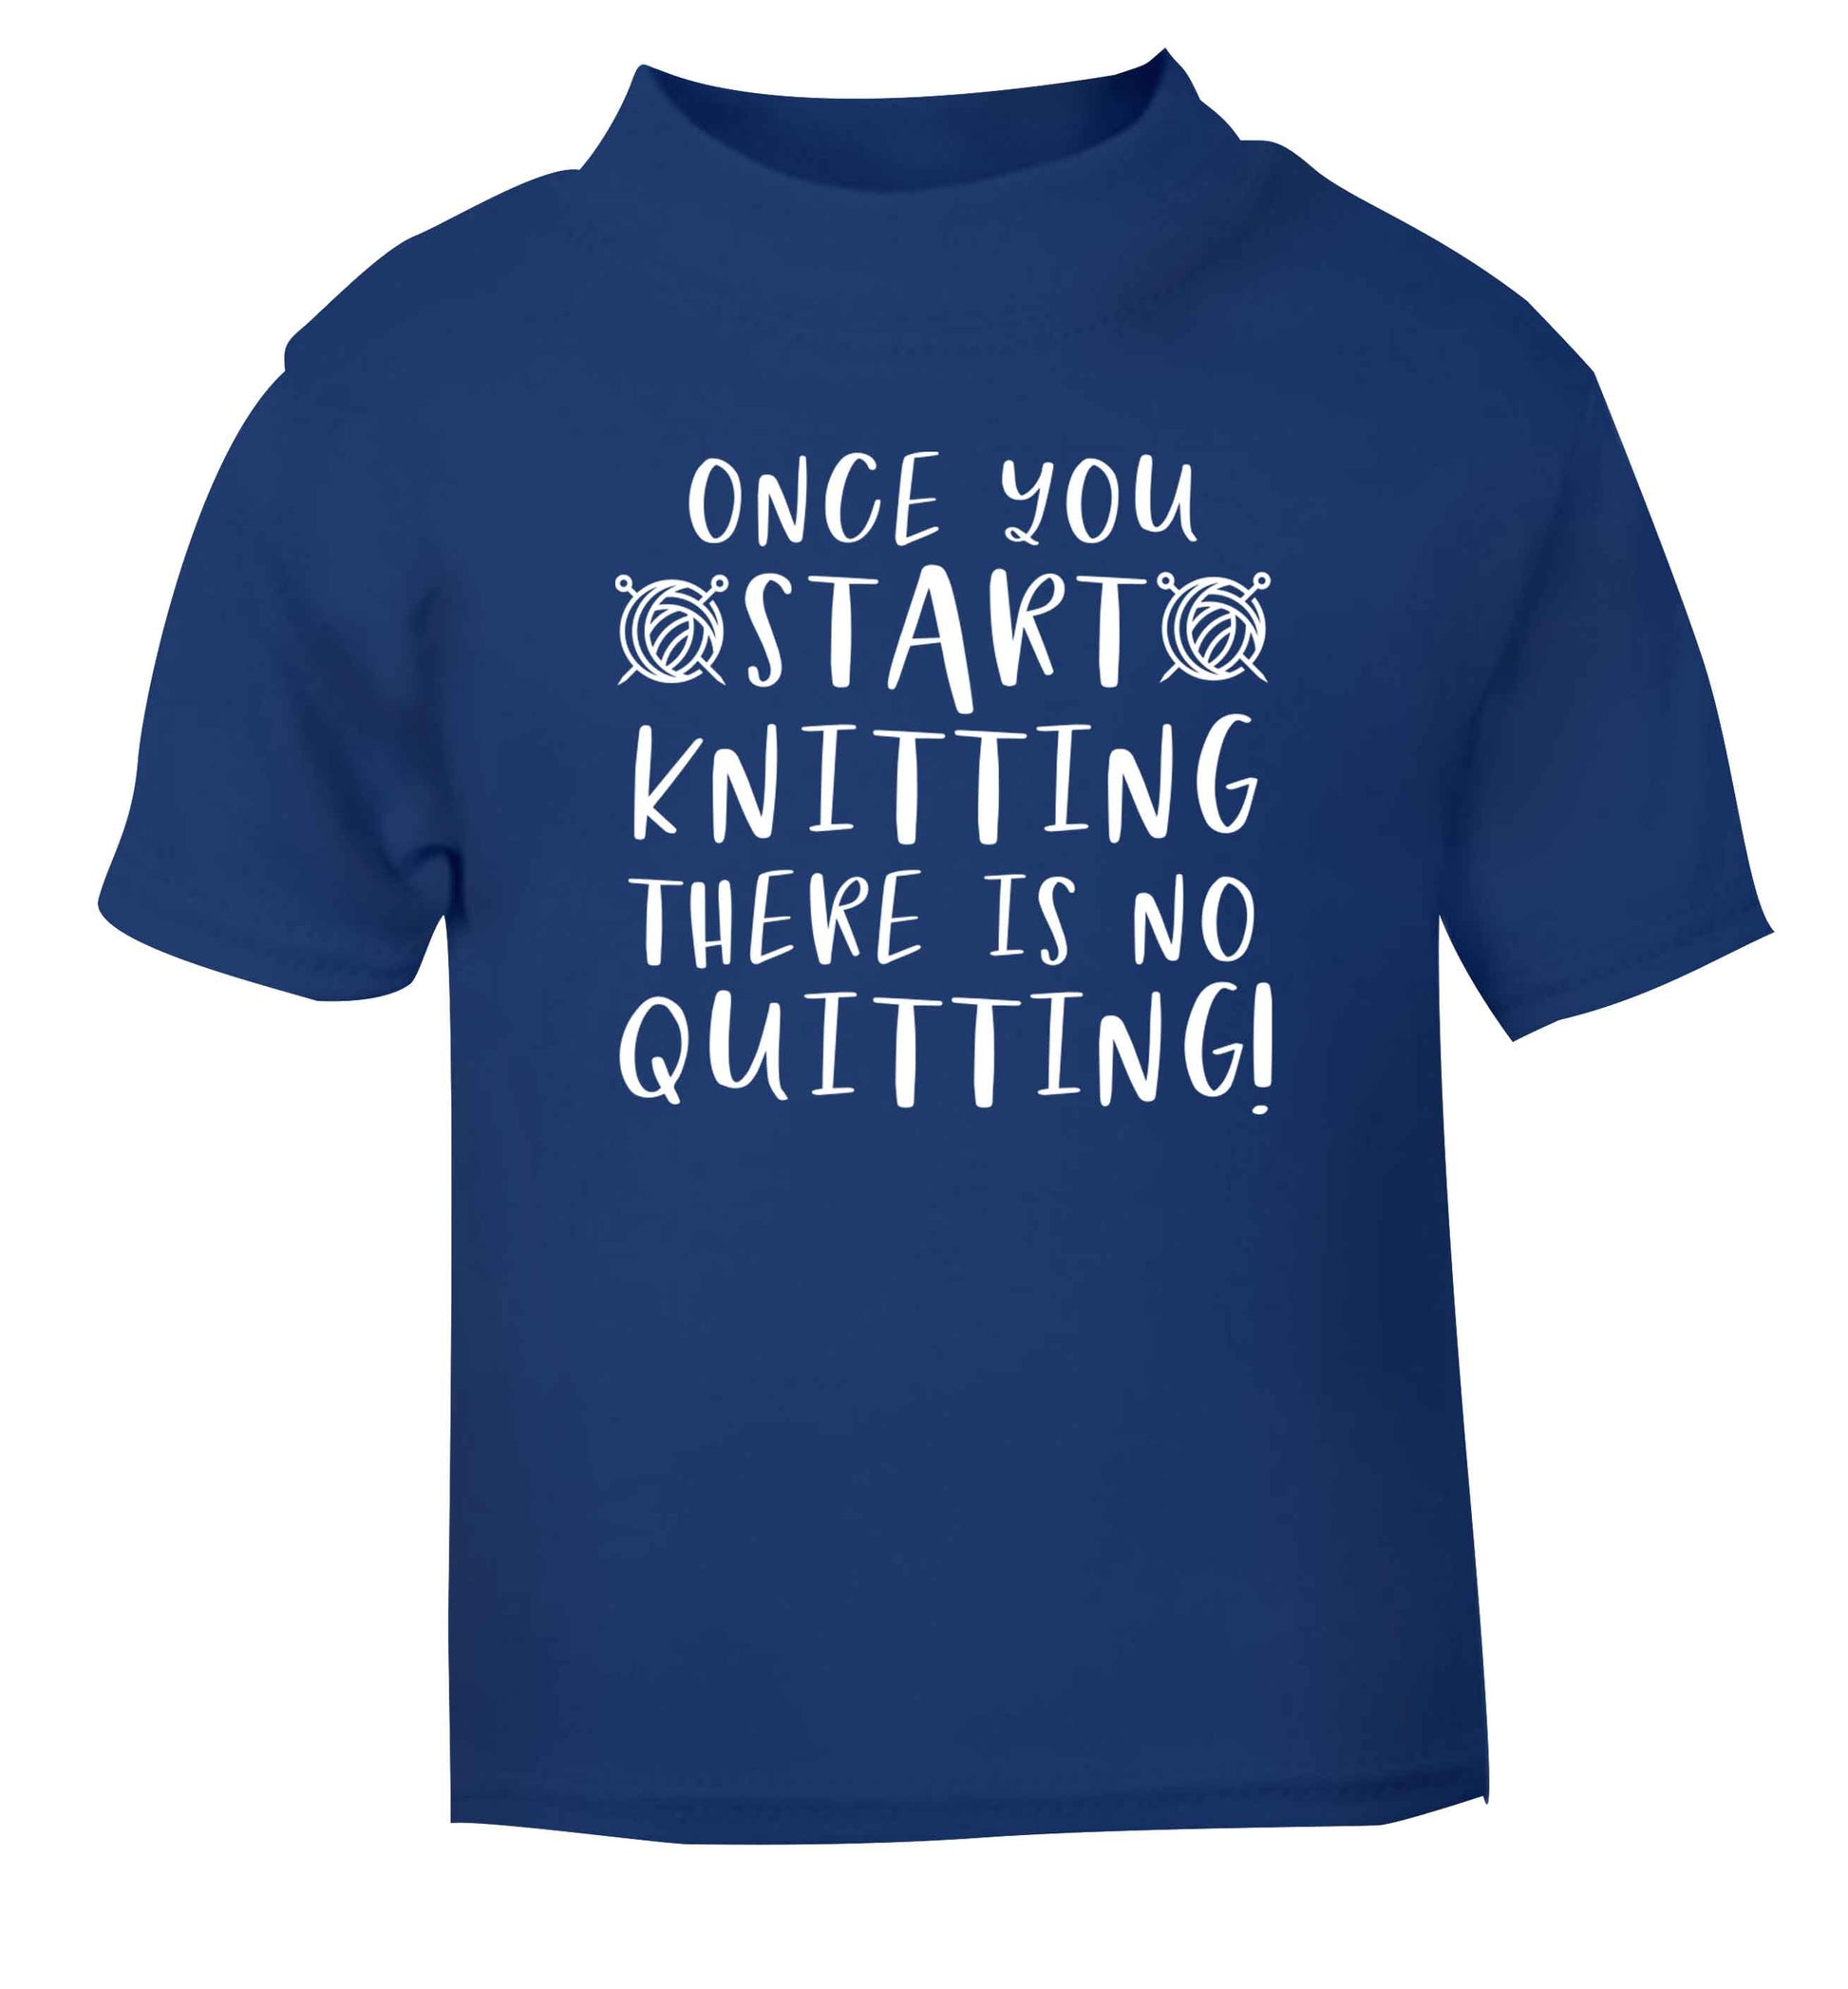 Once you start knitting there is no quitting! blue Baby Toddler Tshirt 2 Years